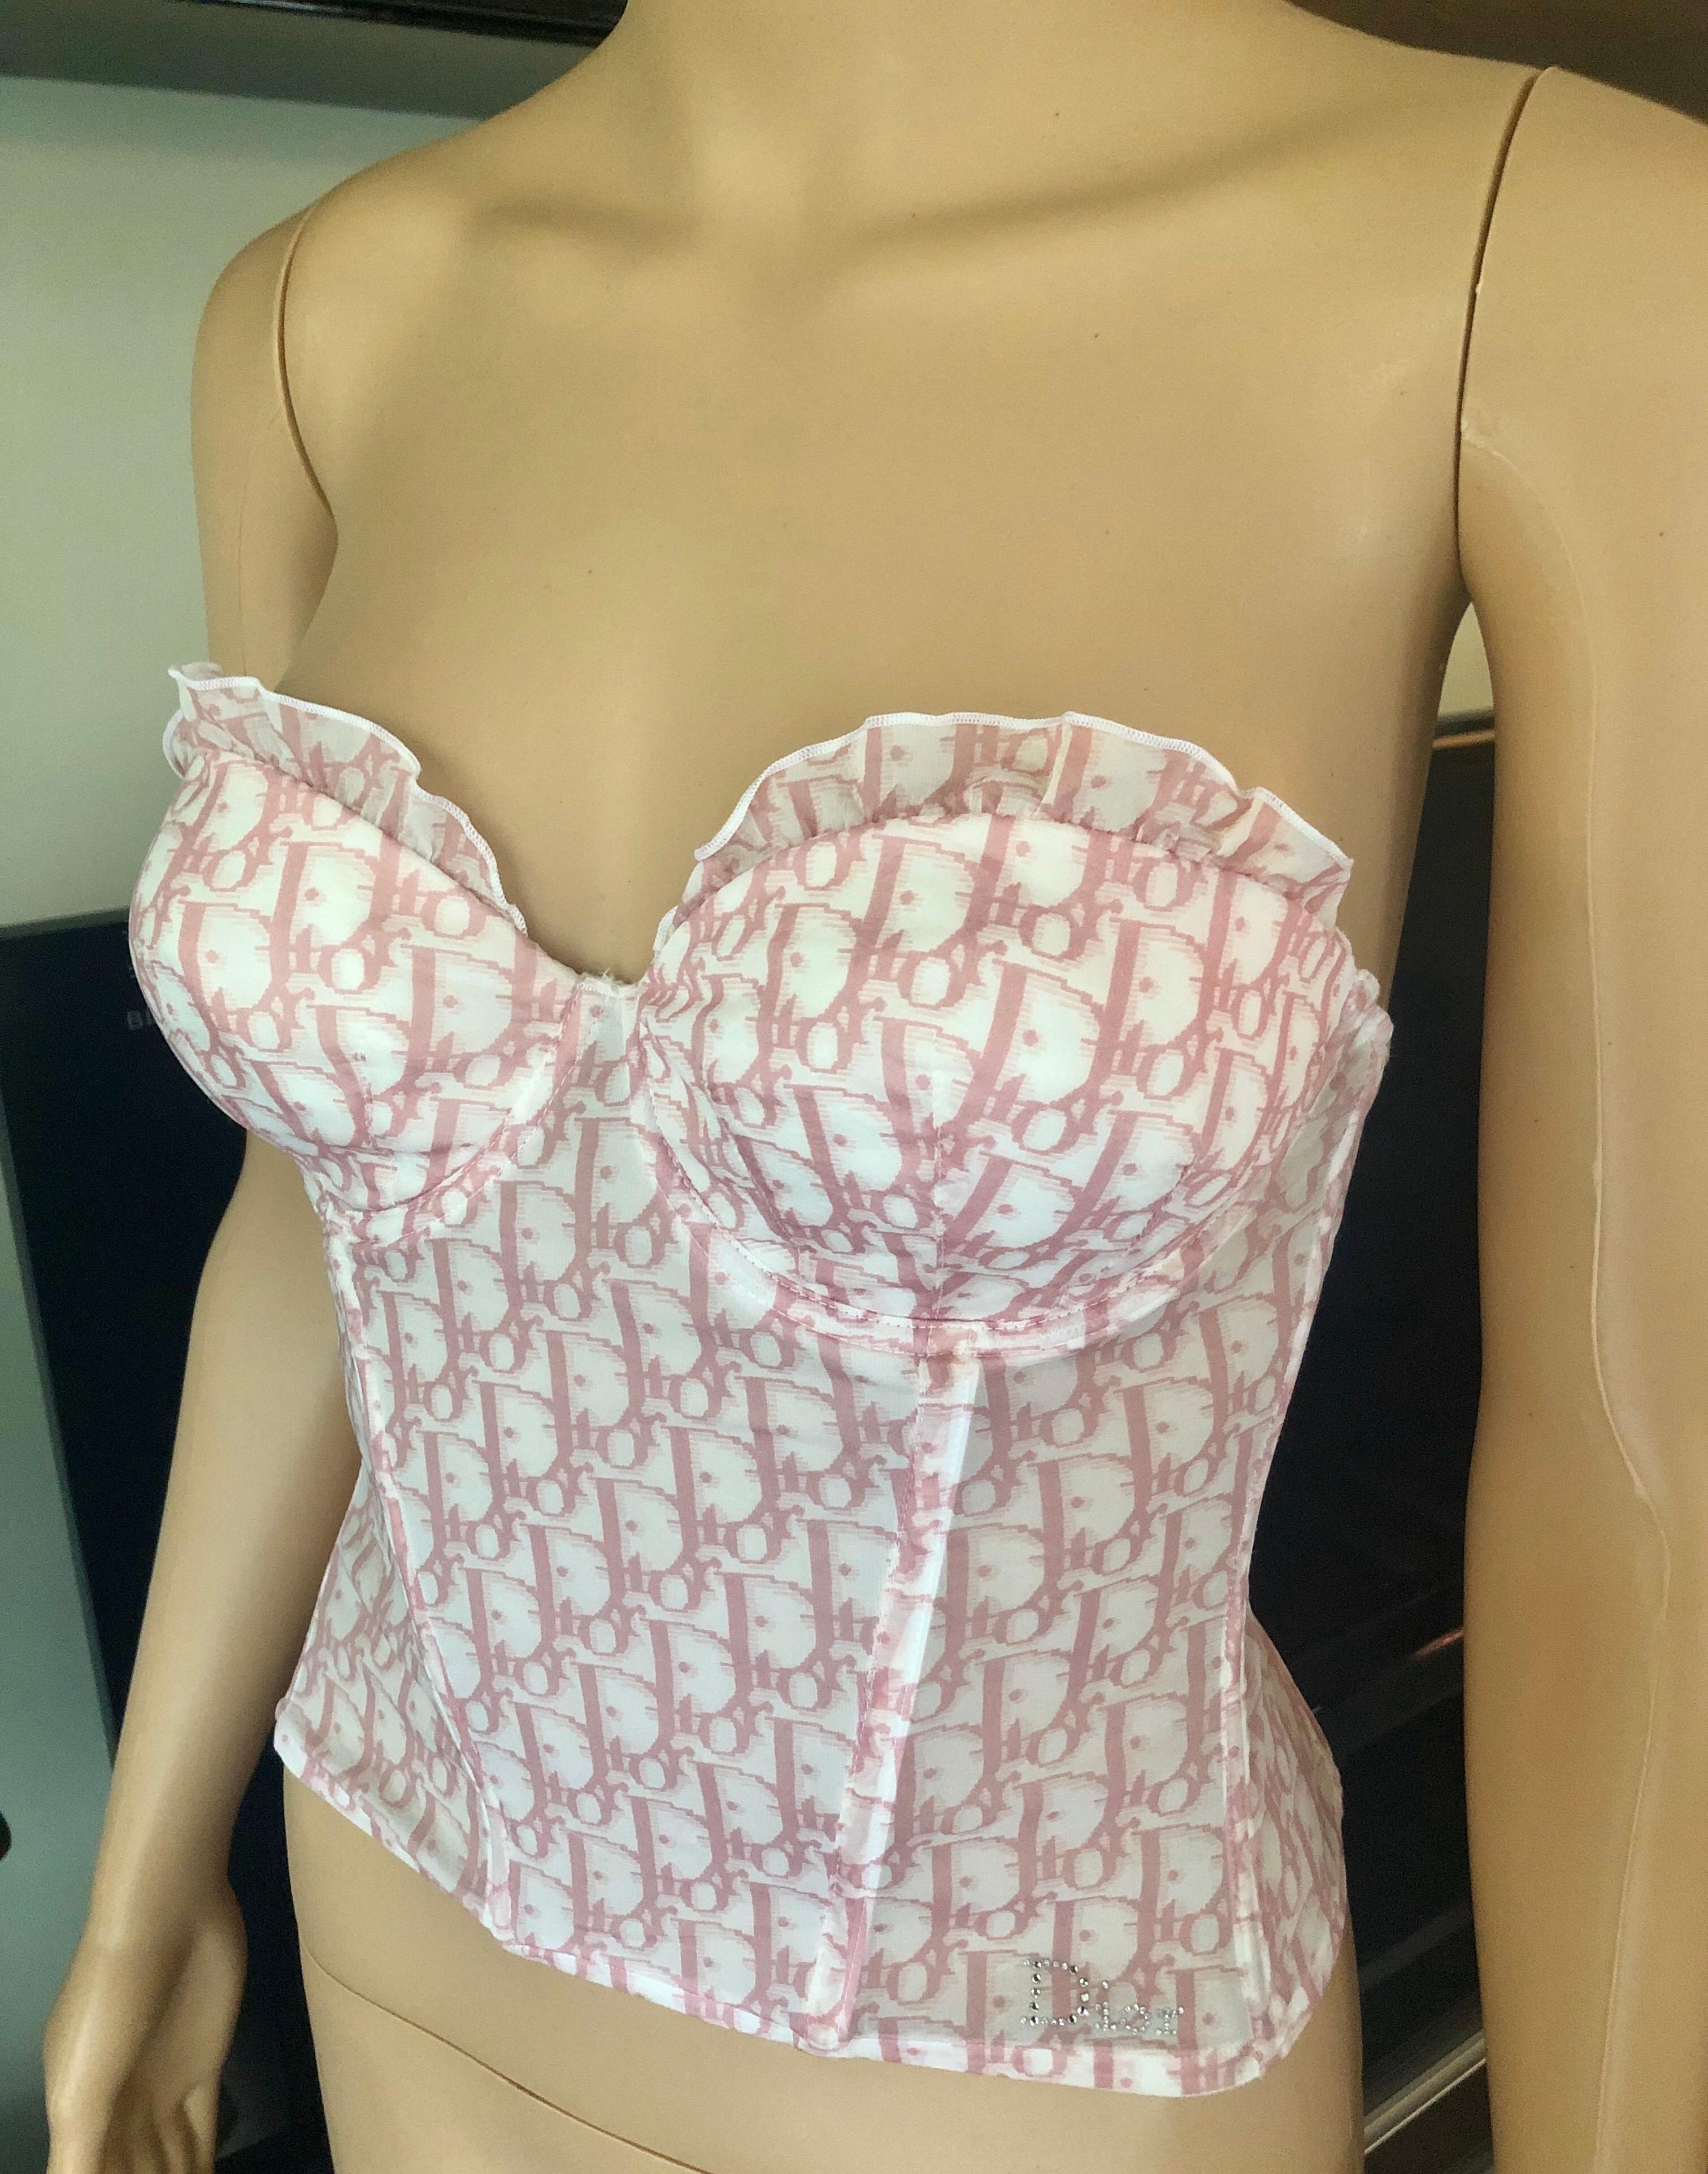 Christian Dior by John Galliano S/S 2003 Diorissimo Logo Monogram Sheer Bustier Top FR 36

Pink and white Christian Dior silk-blend semi-sheer bustier cropped top with Diorissimo monogram print throughout, rhinestone embellishments at front and